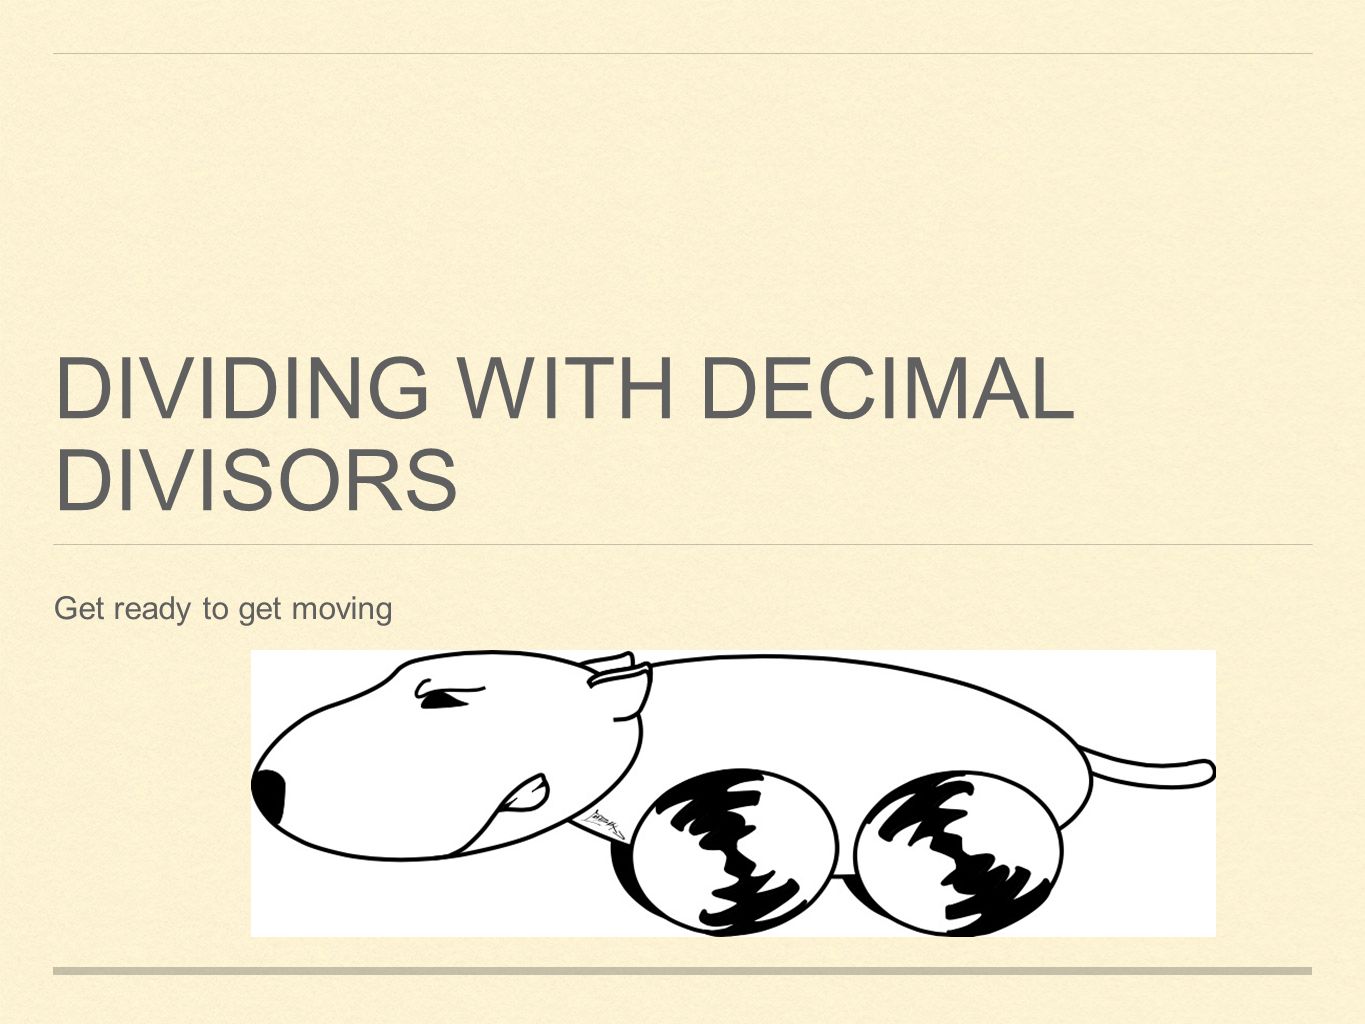 DIVIDING WITH DECIMAL DIVISORS Get ready to get moving